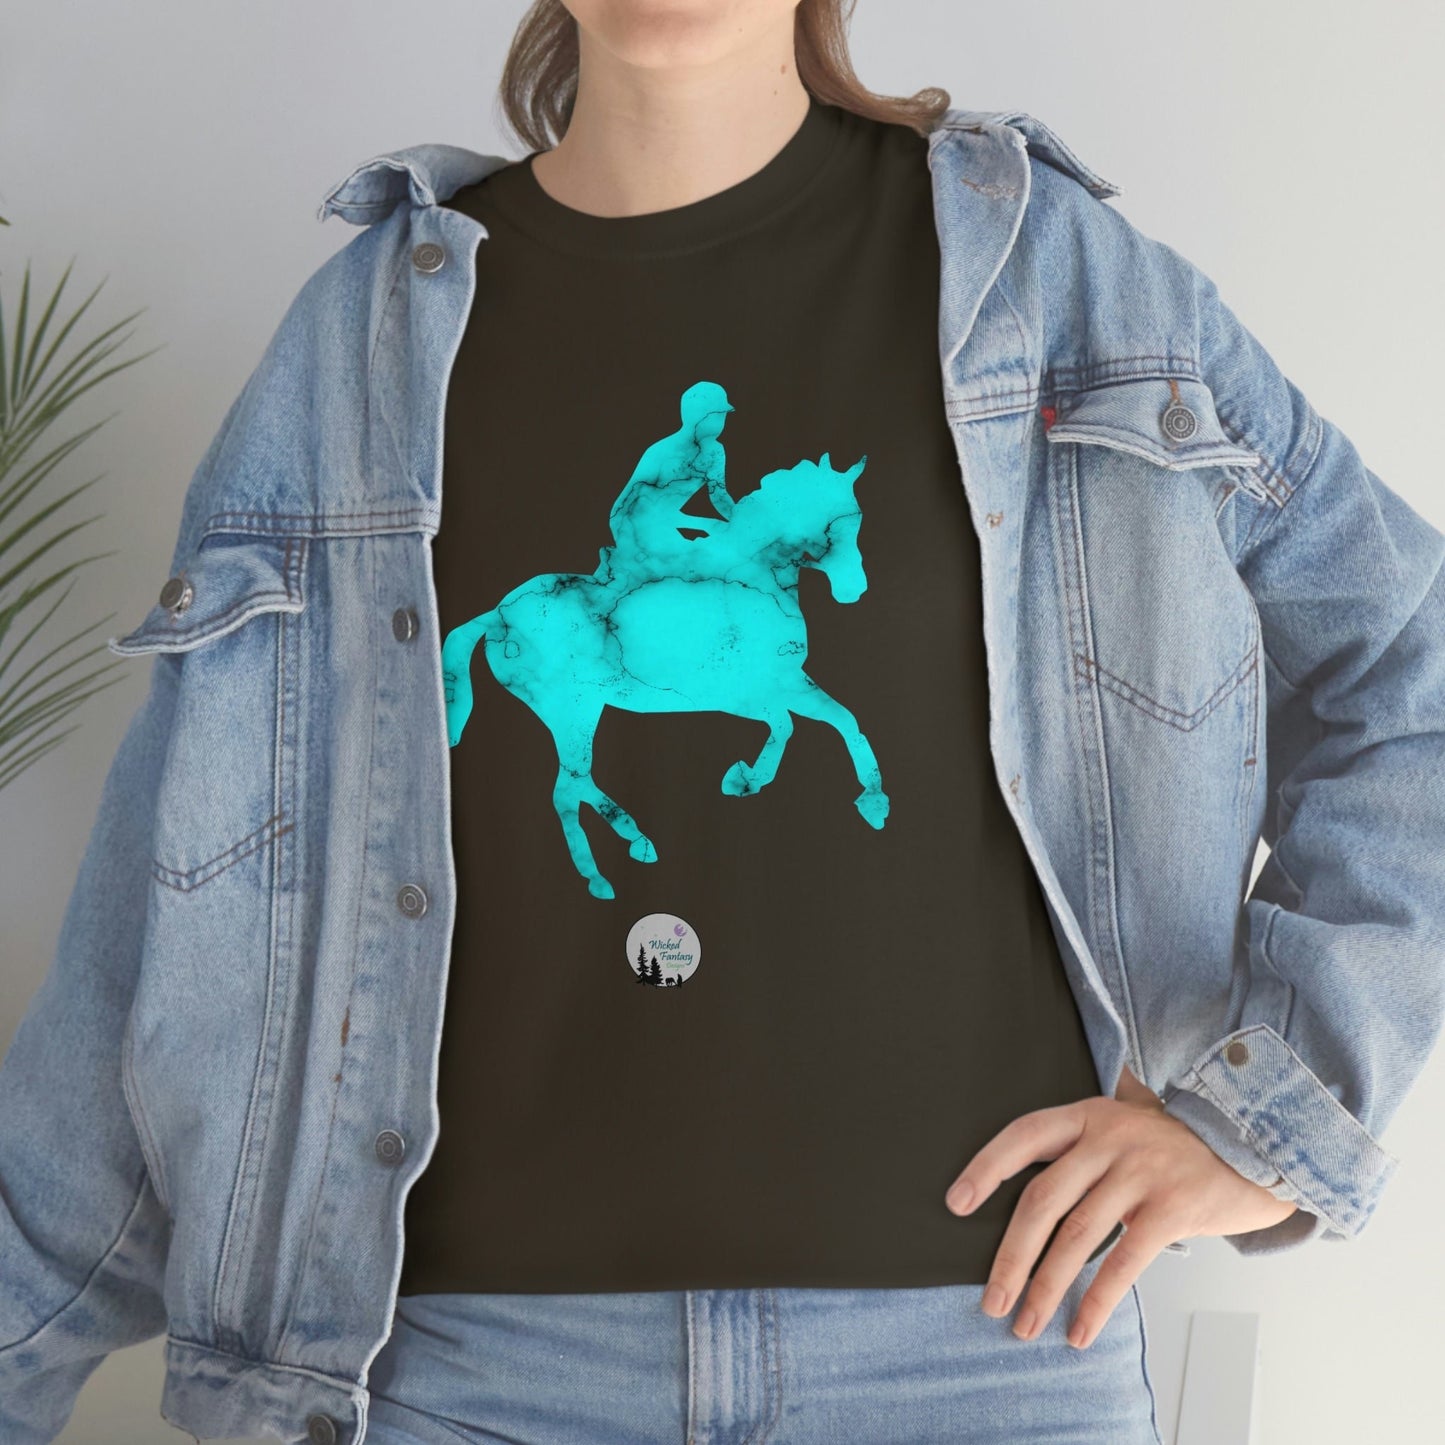 Turquoise Gemstone Eventing Horse Cross Country Horse English Edgy Cute Heavy Cotton Tee